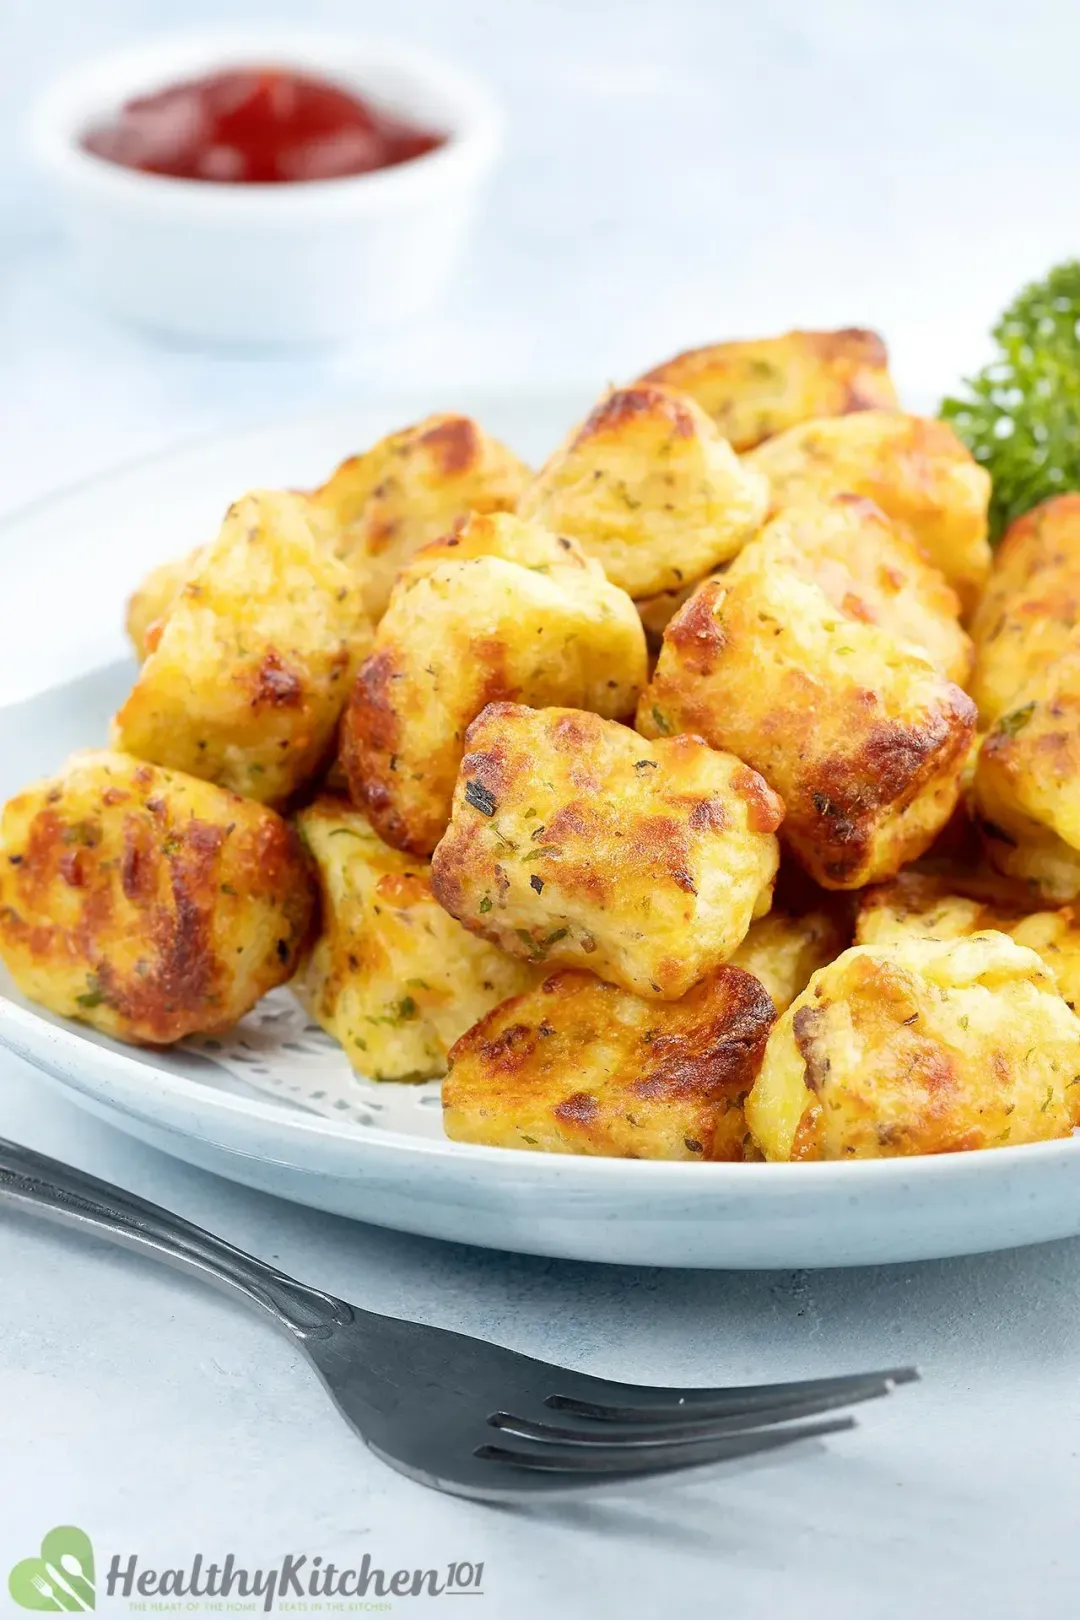 Tips for Making Tater Tots